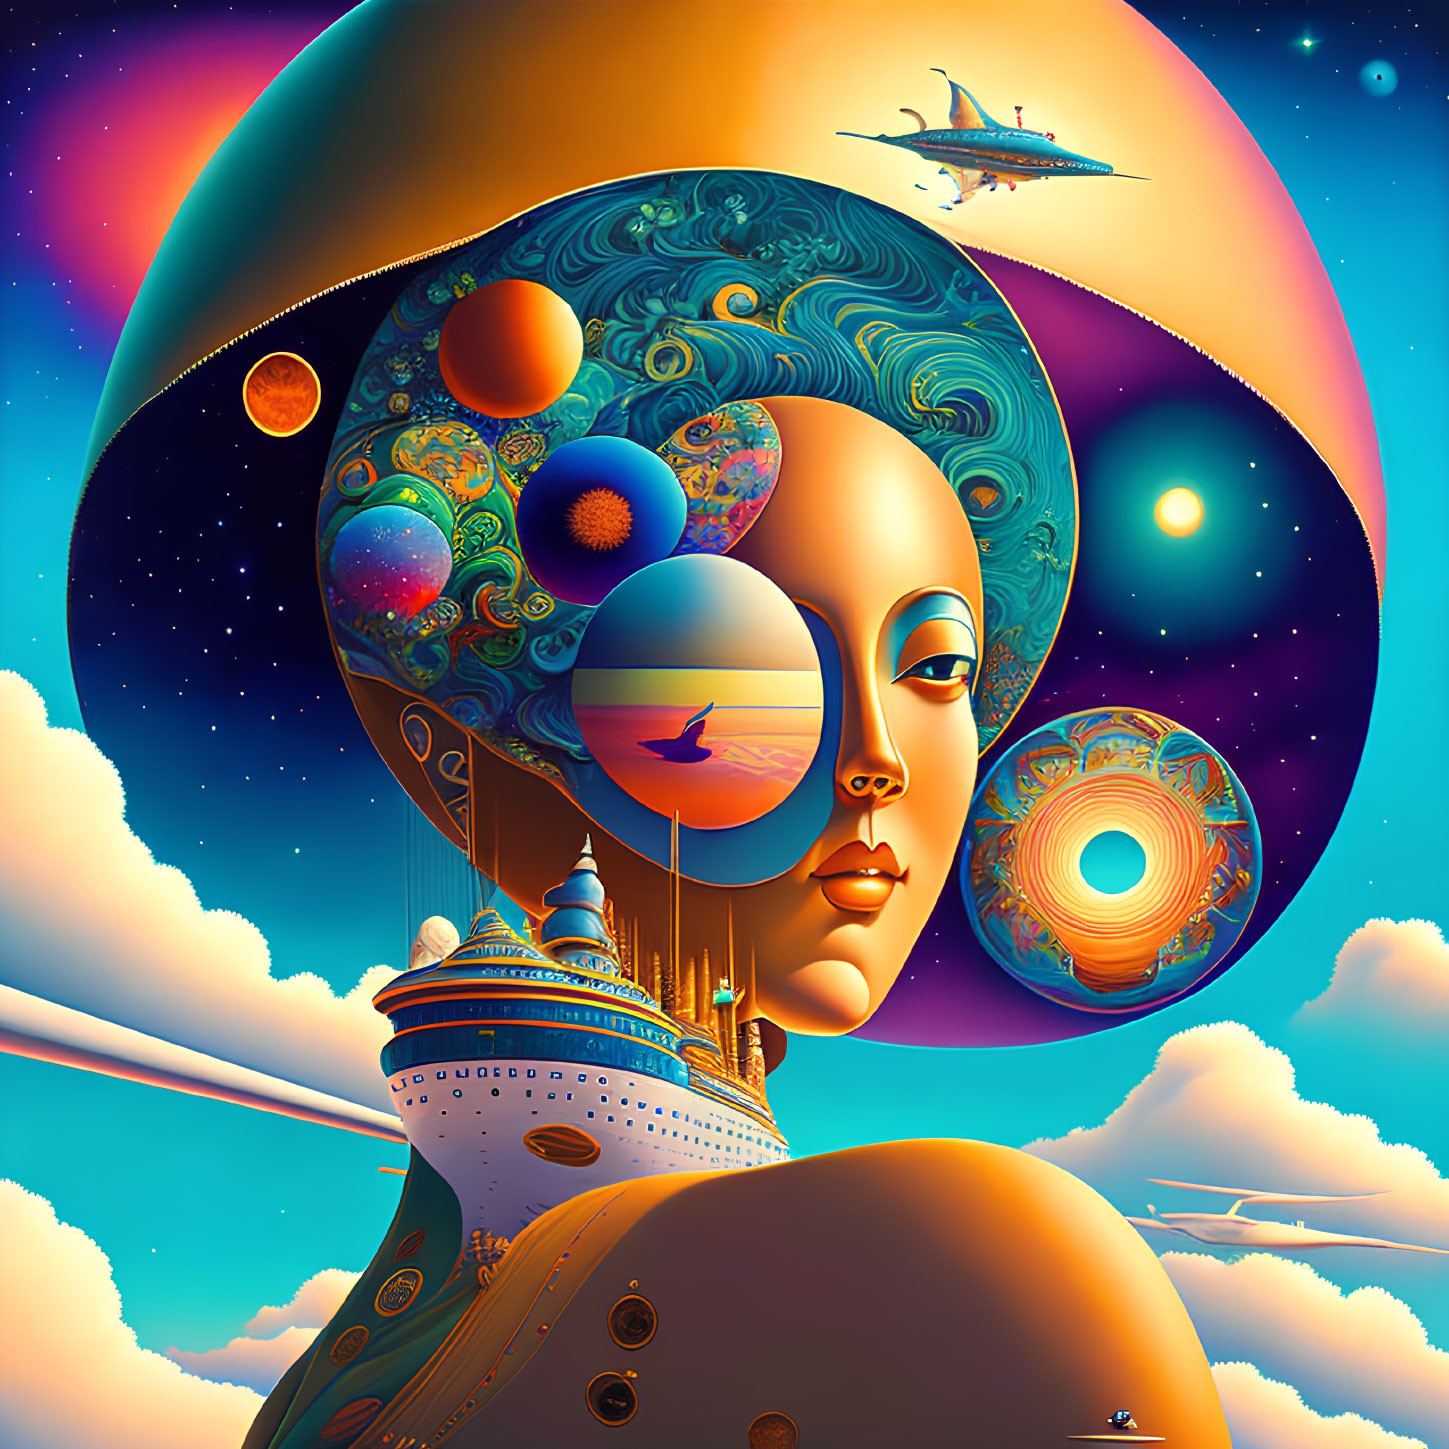 Digital art: Woman fused with celestial and futuristic elements in sunset backdrop